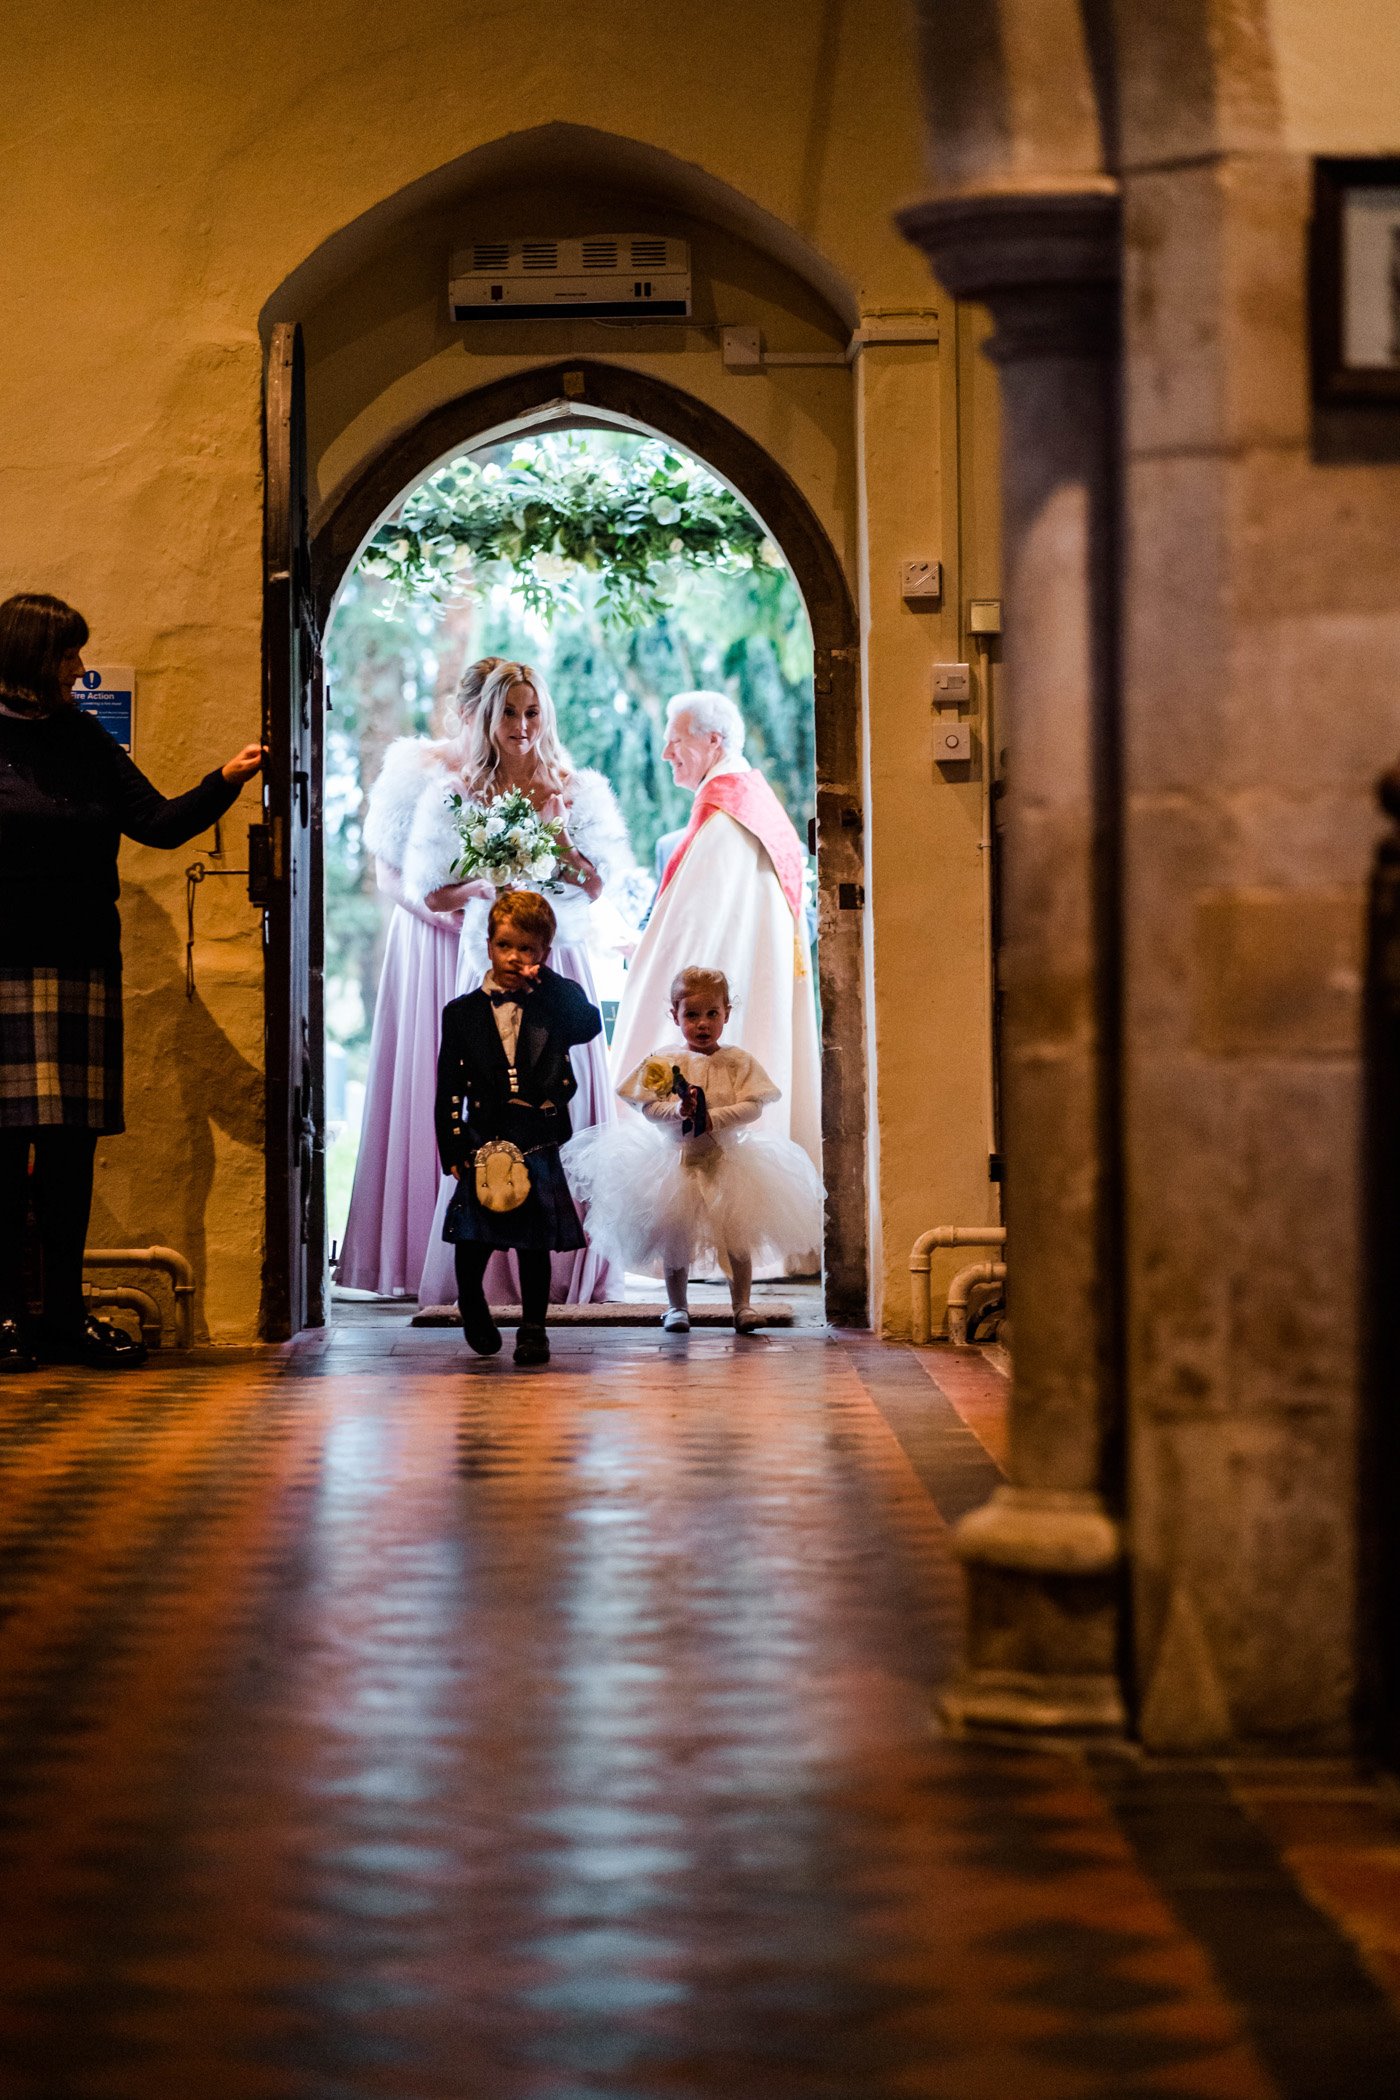 Flower girl and page boy enter the church through beautiful door vicar and bride follow